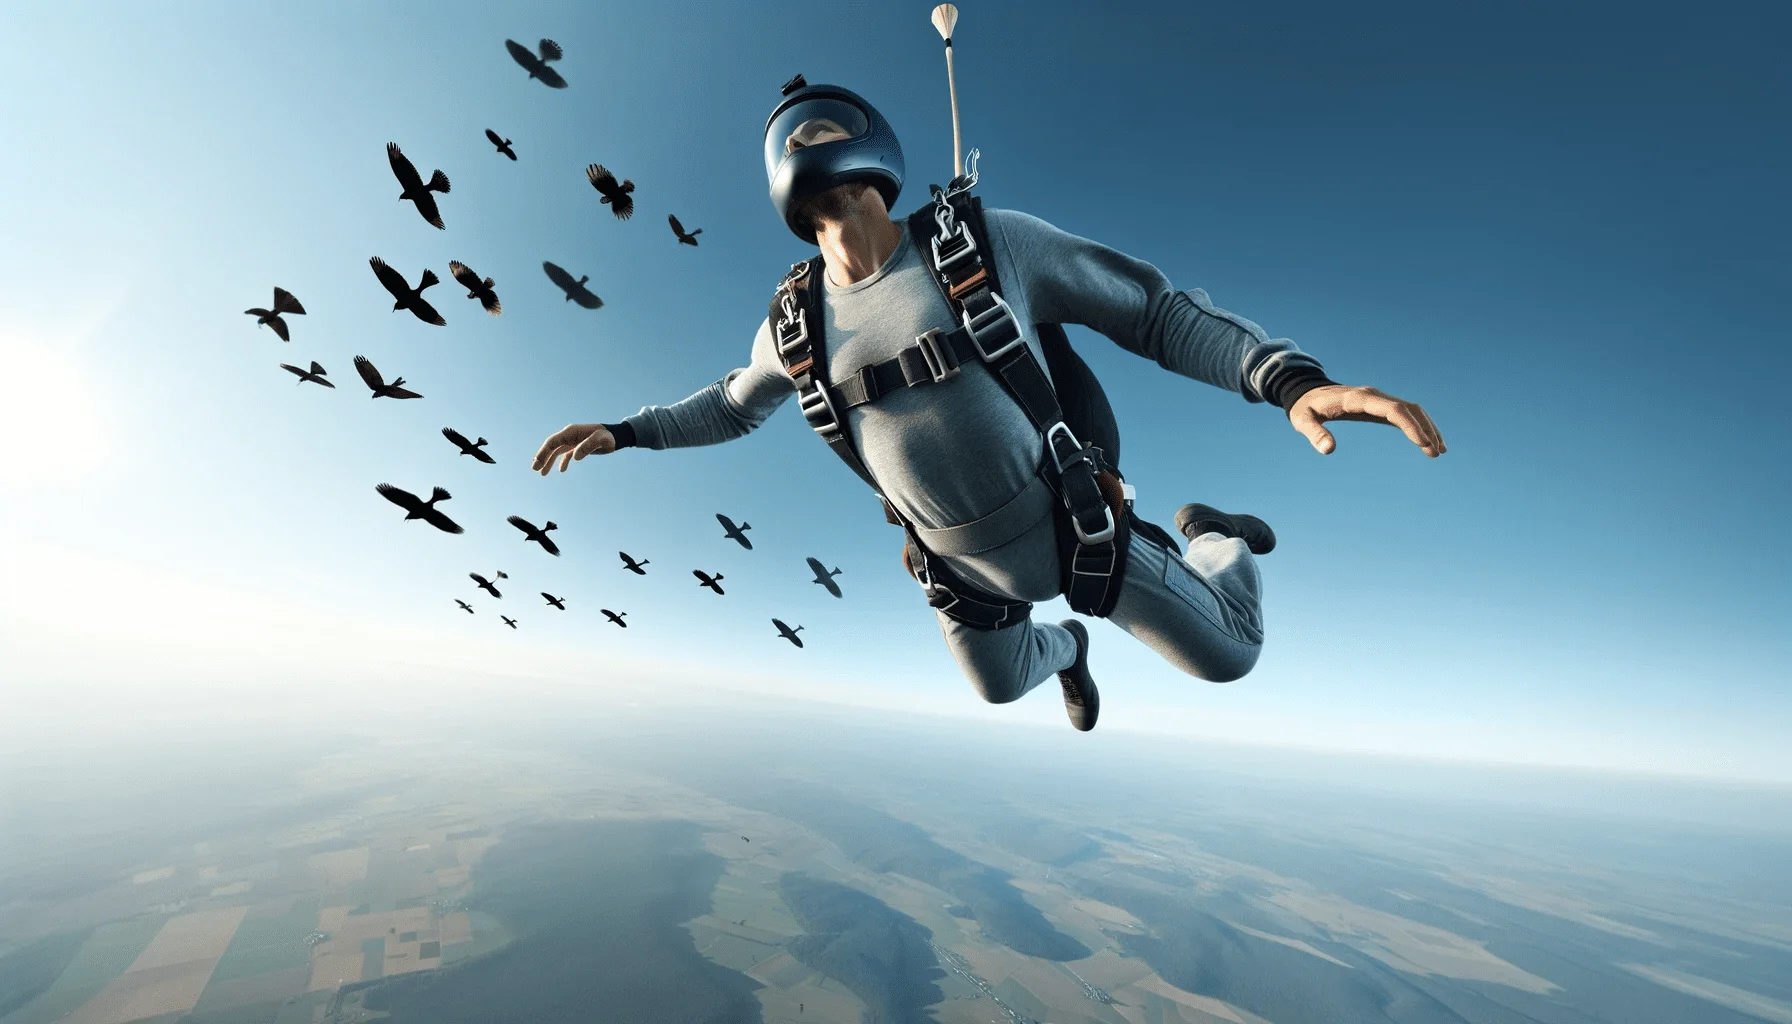 Can You Hit a Bird While Skydiving? Let’s Explore